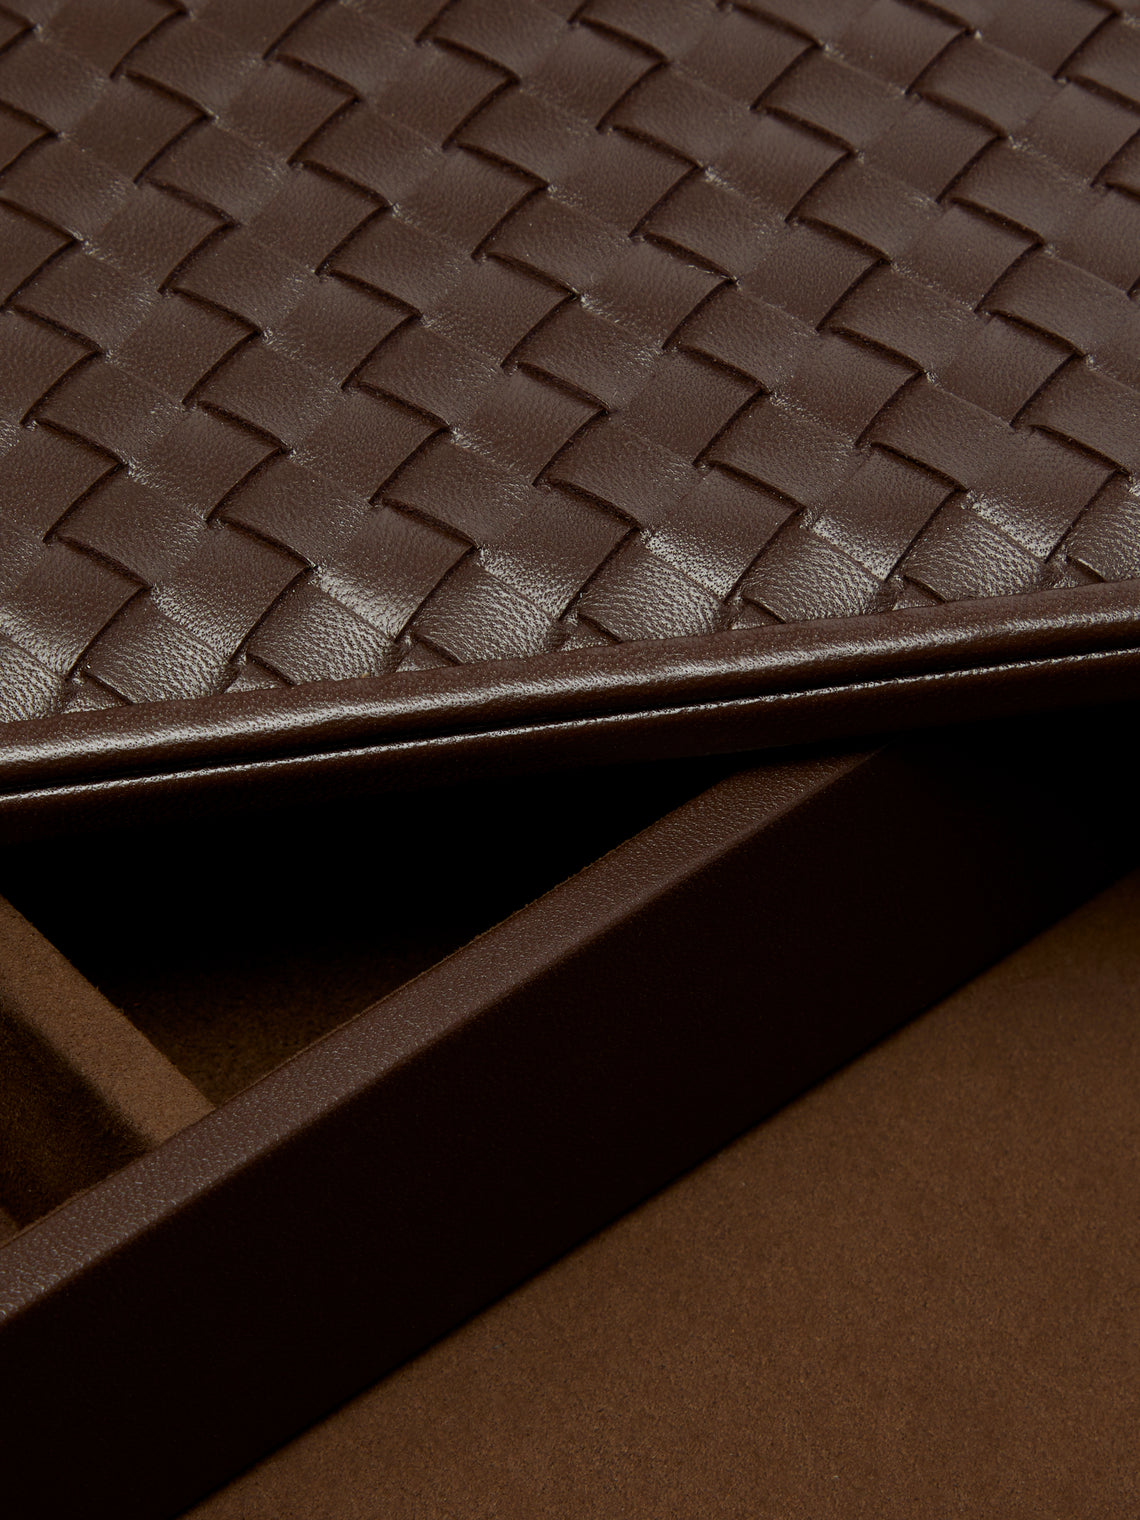 Riviere - Woven Leather Desk Set - Brown - ABASK